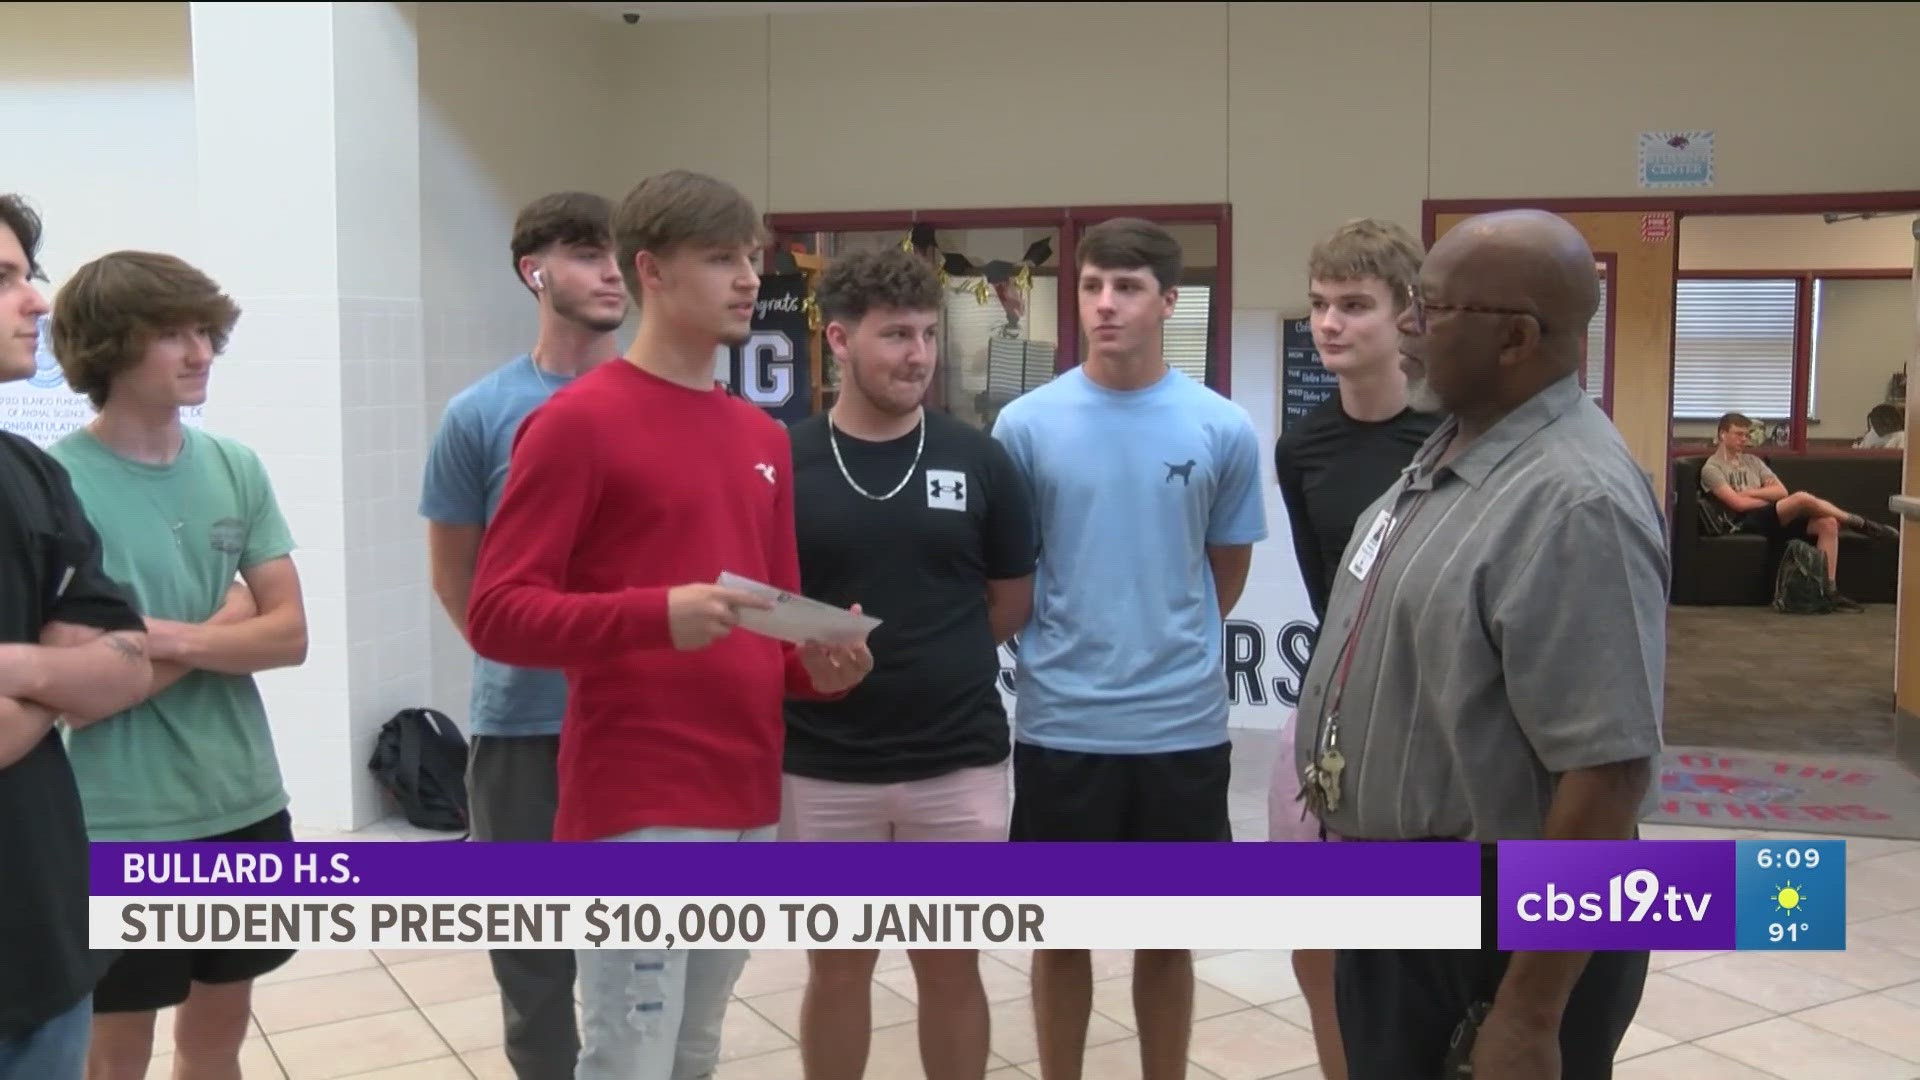 Bullard teens present over $10,000 check to beloved custodian, father of 5 who recently lost wife